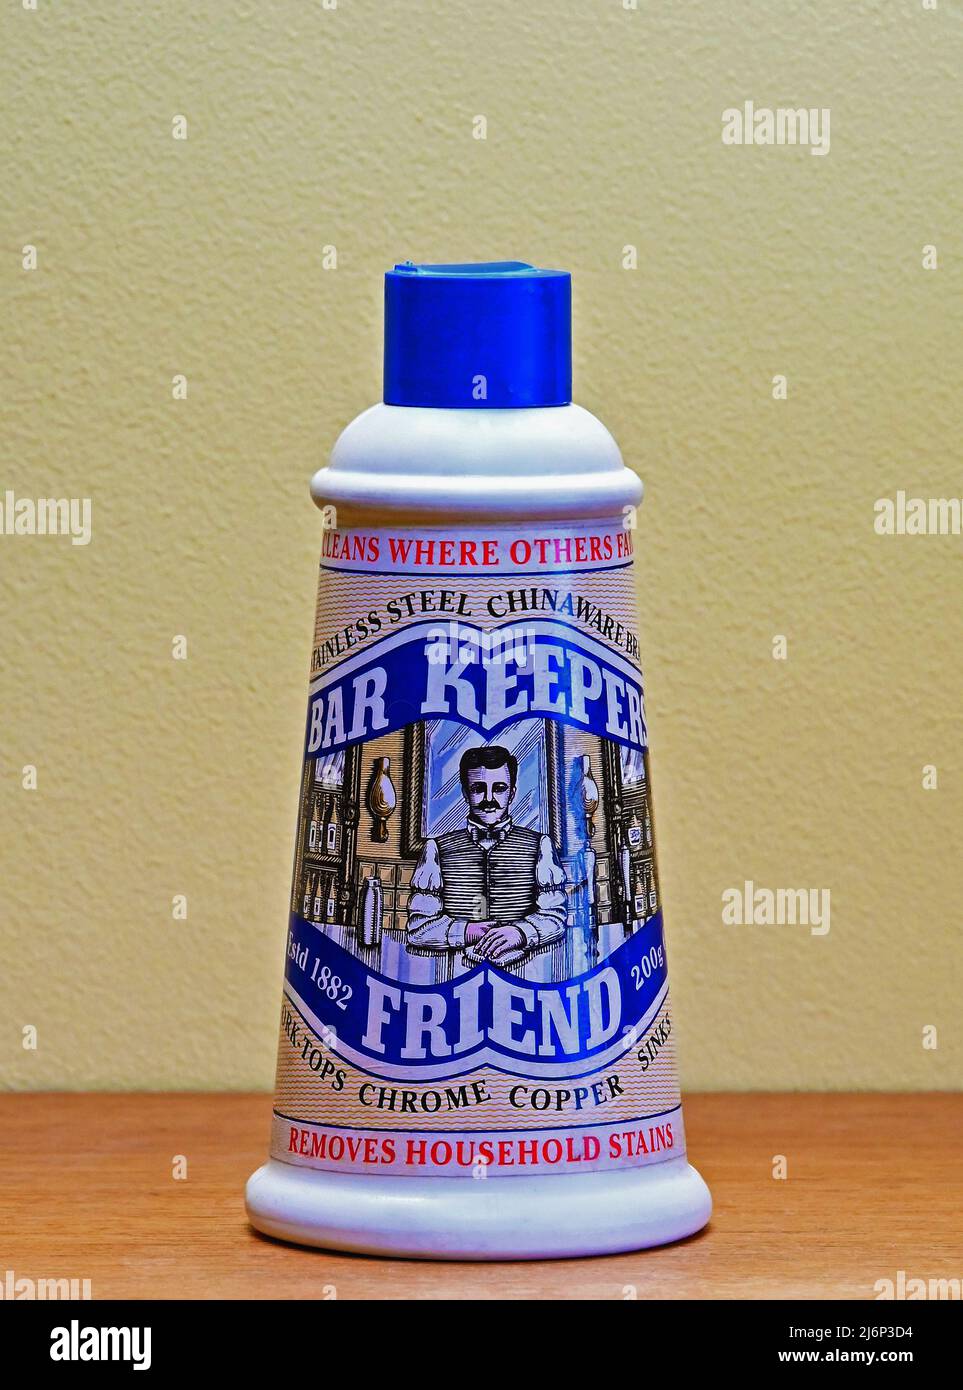 Bar Keepers Friend. Removes household stains. Stock Photo